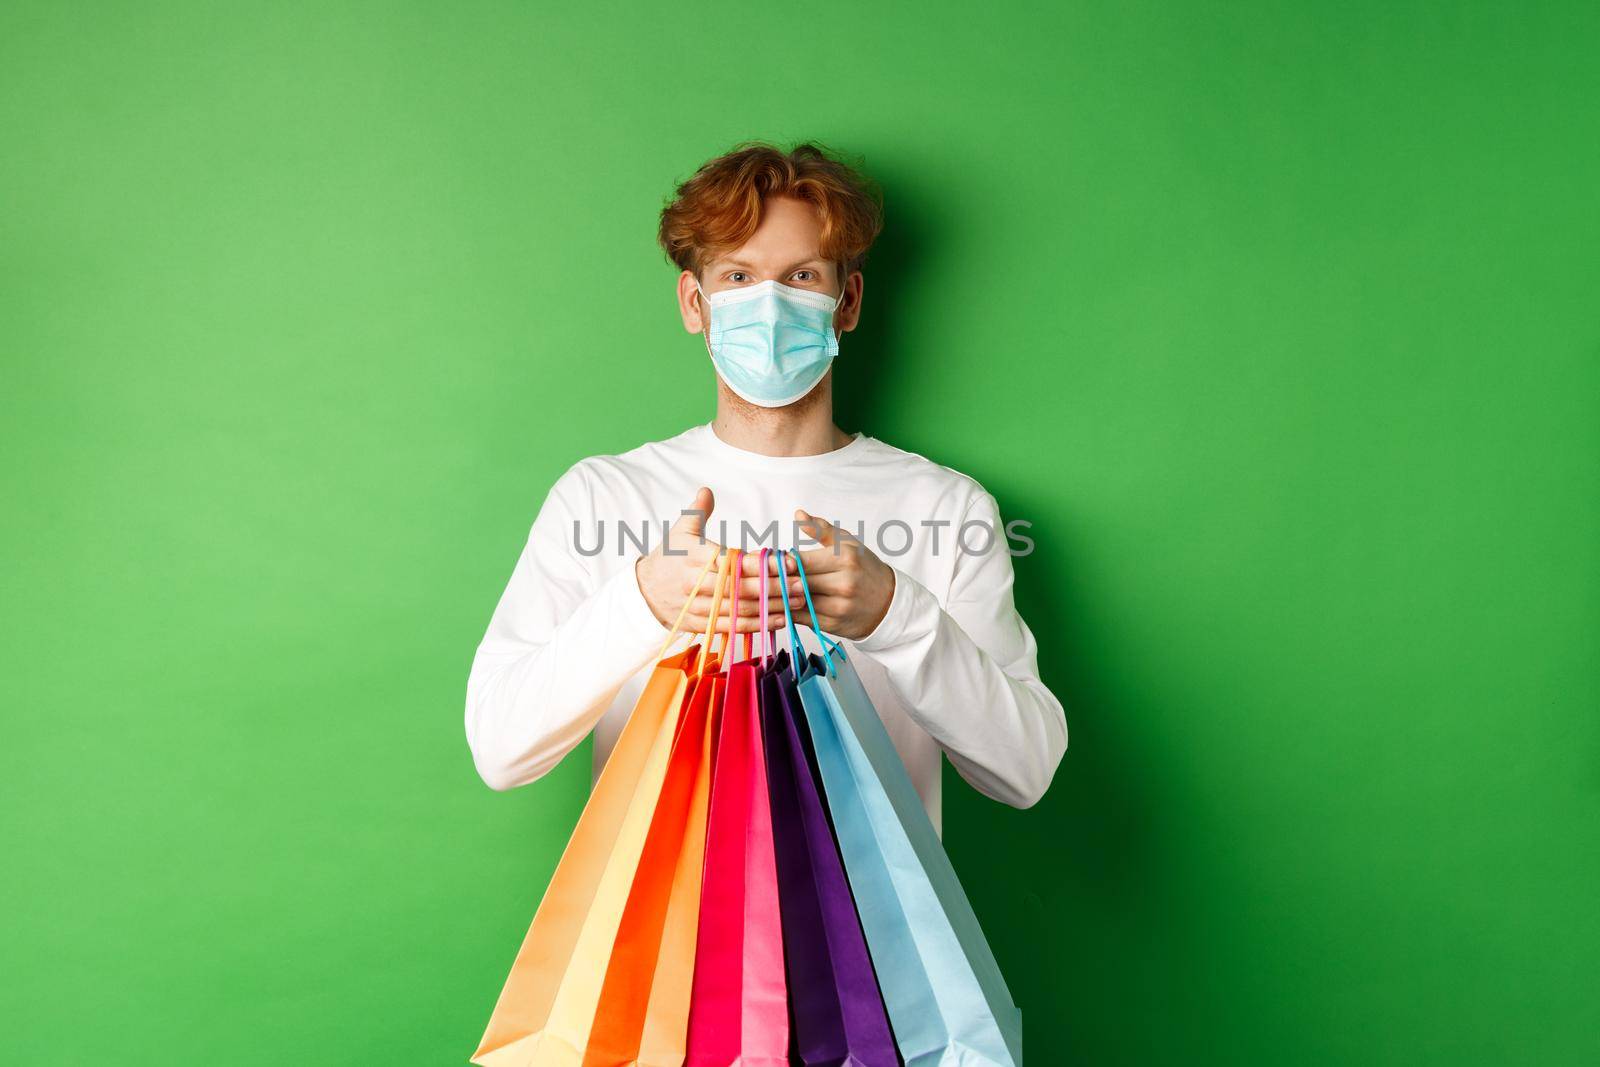 Pandemic and lifestyle concept. Cheerful redhead man going shopping in store, wearing medical mask and holding bags, standing over green background.